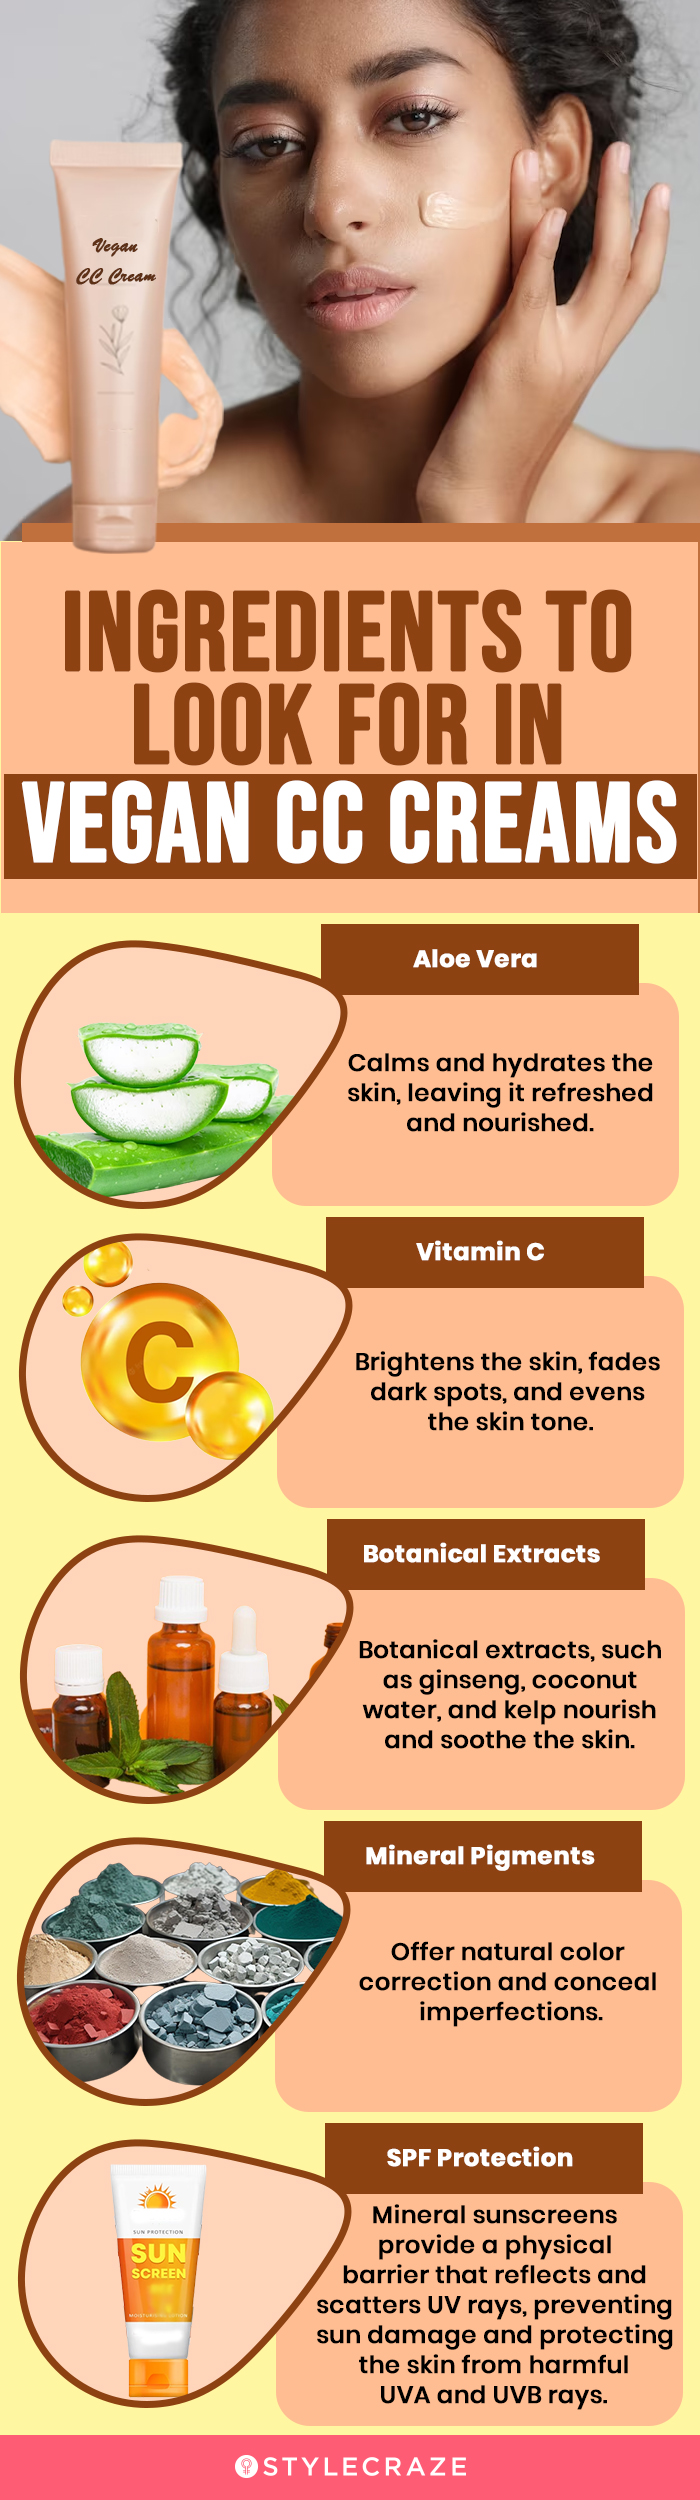 Ingredients To Look For In Vegan CC Creams (infographic)